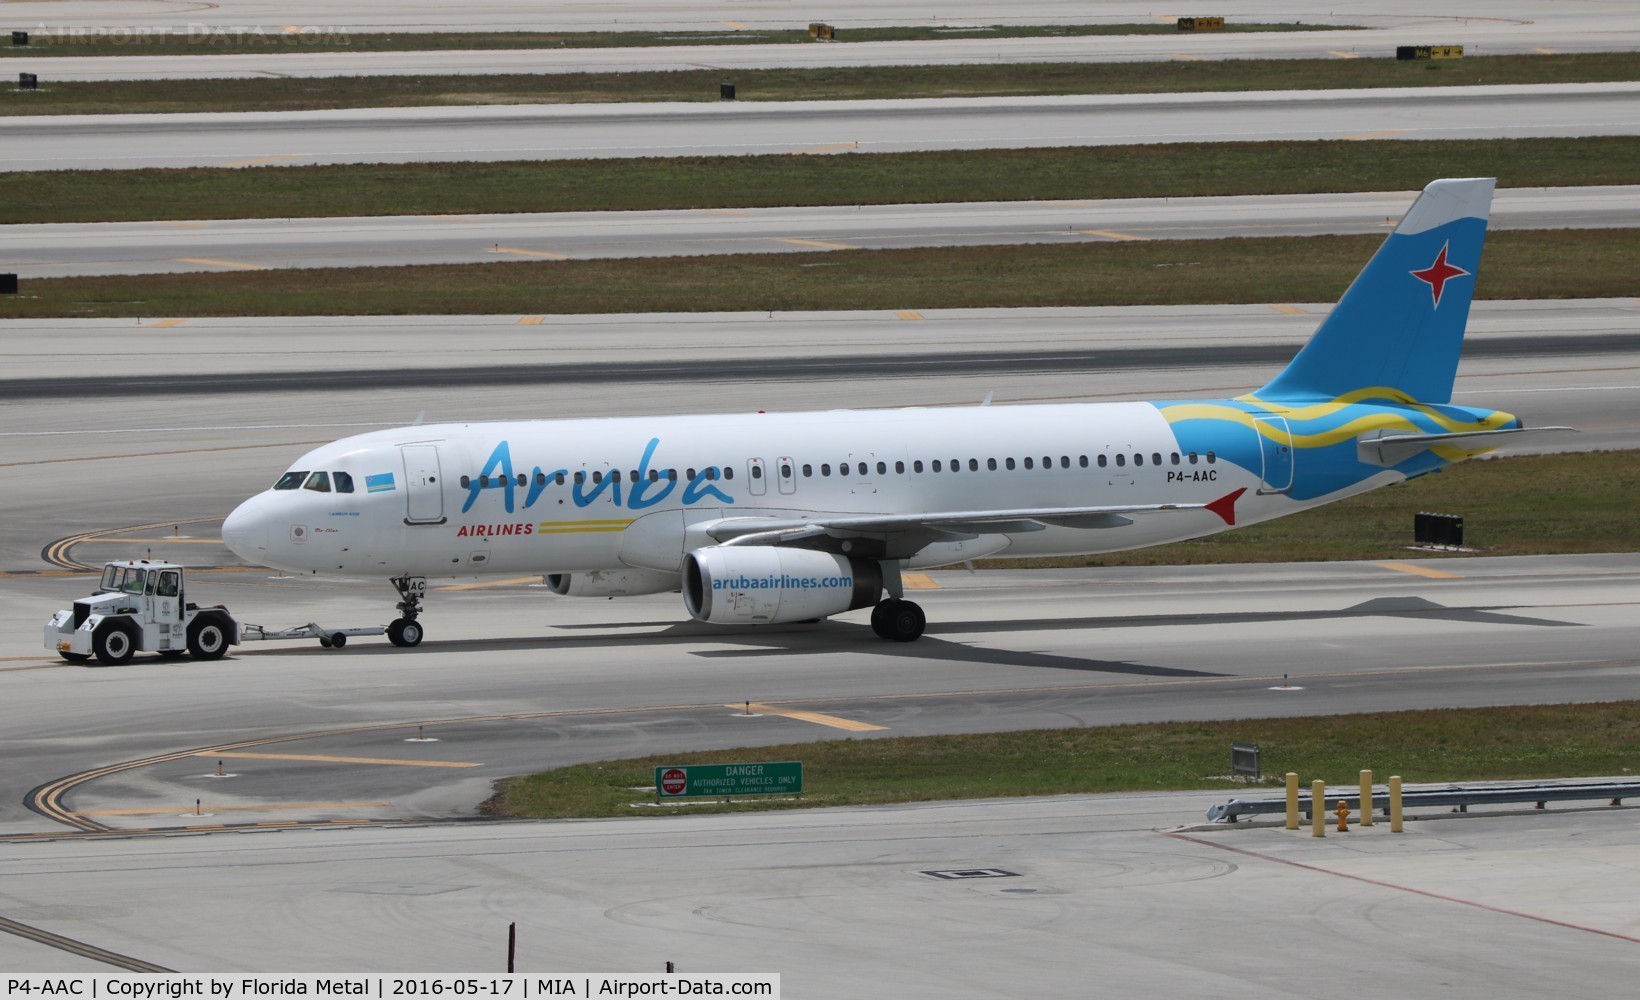 P4-AAC, 1996 Airbus A320-232 C/N 573, Aruba Airlines